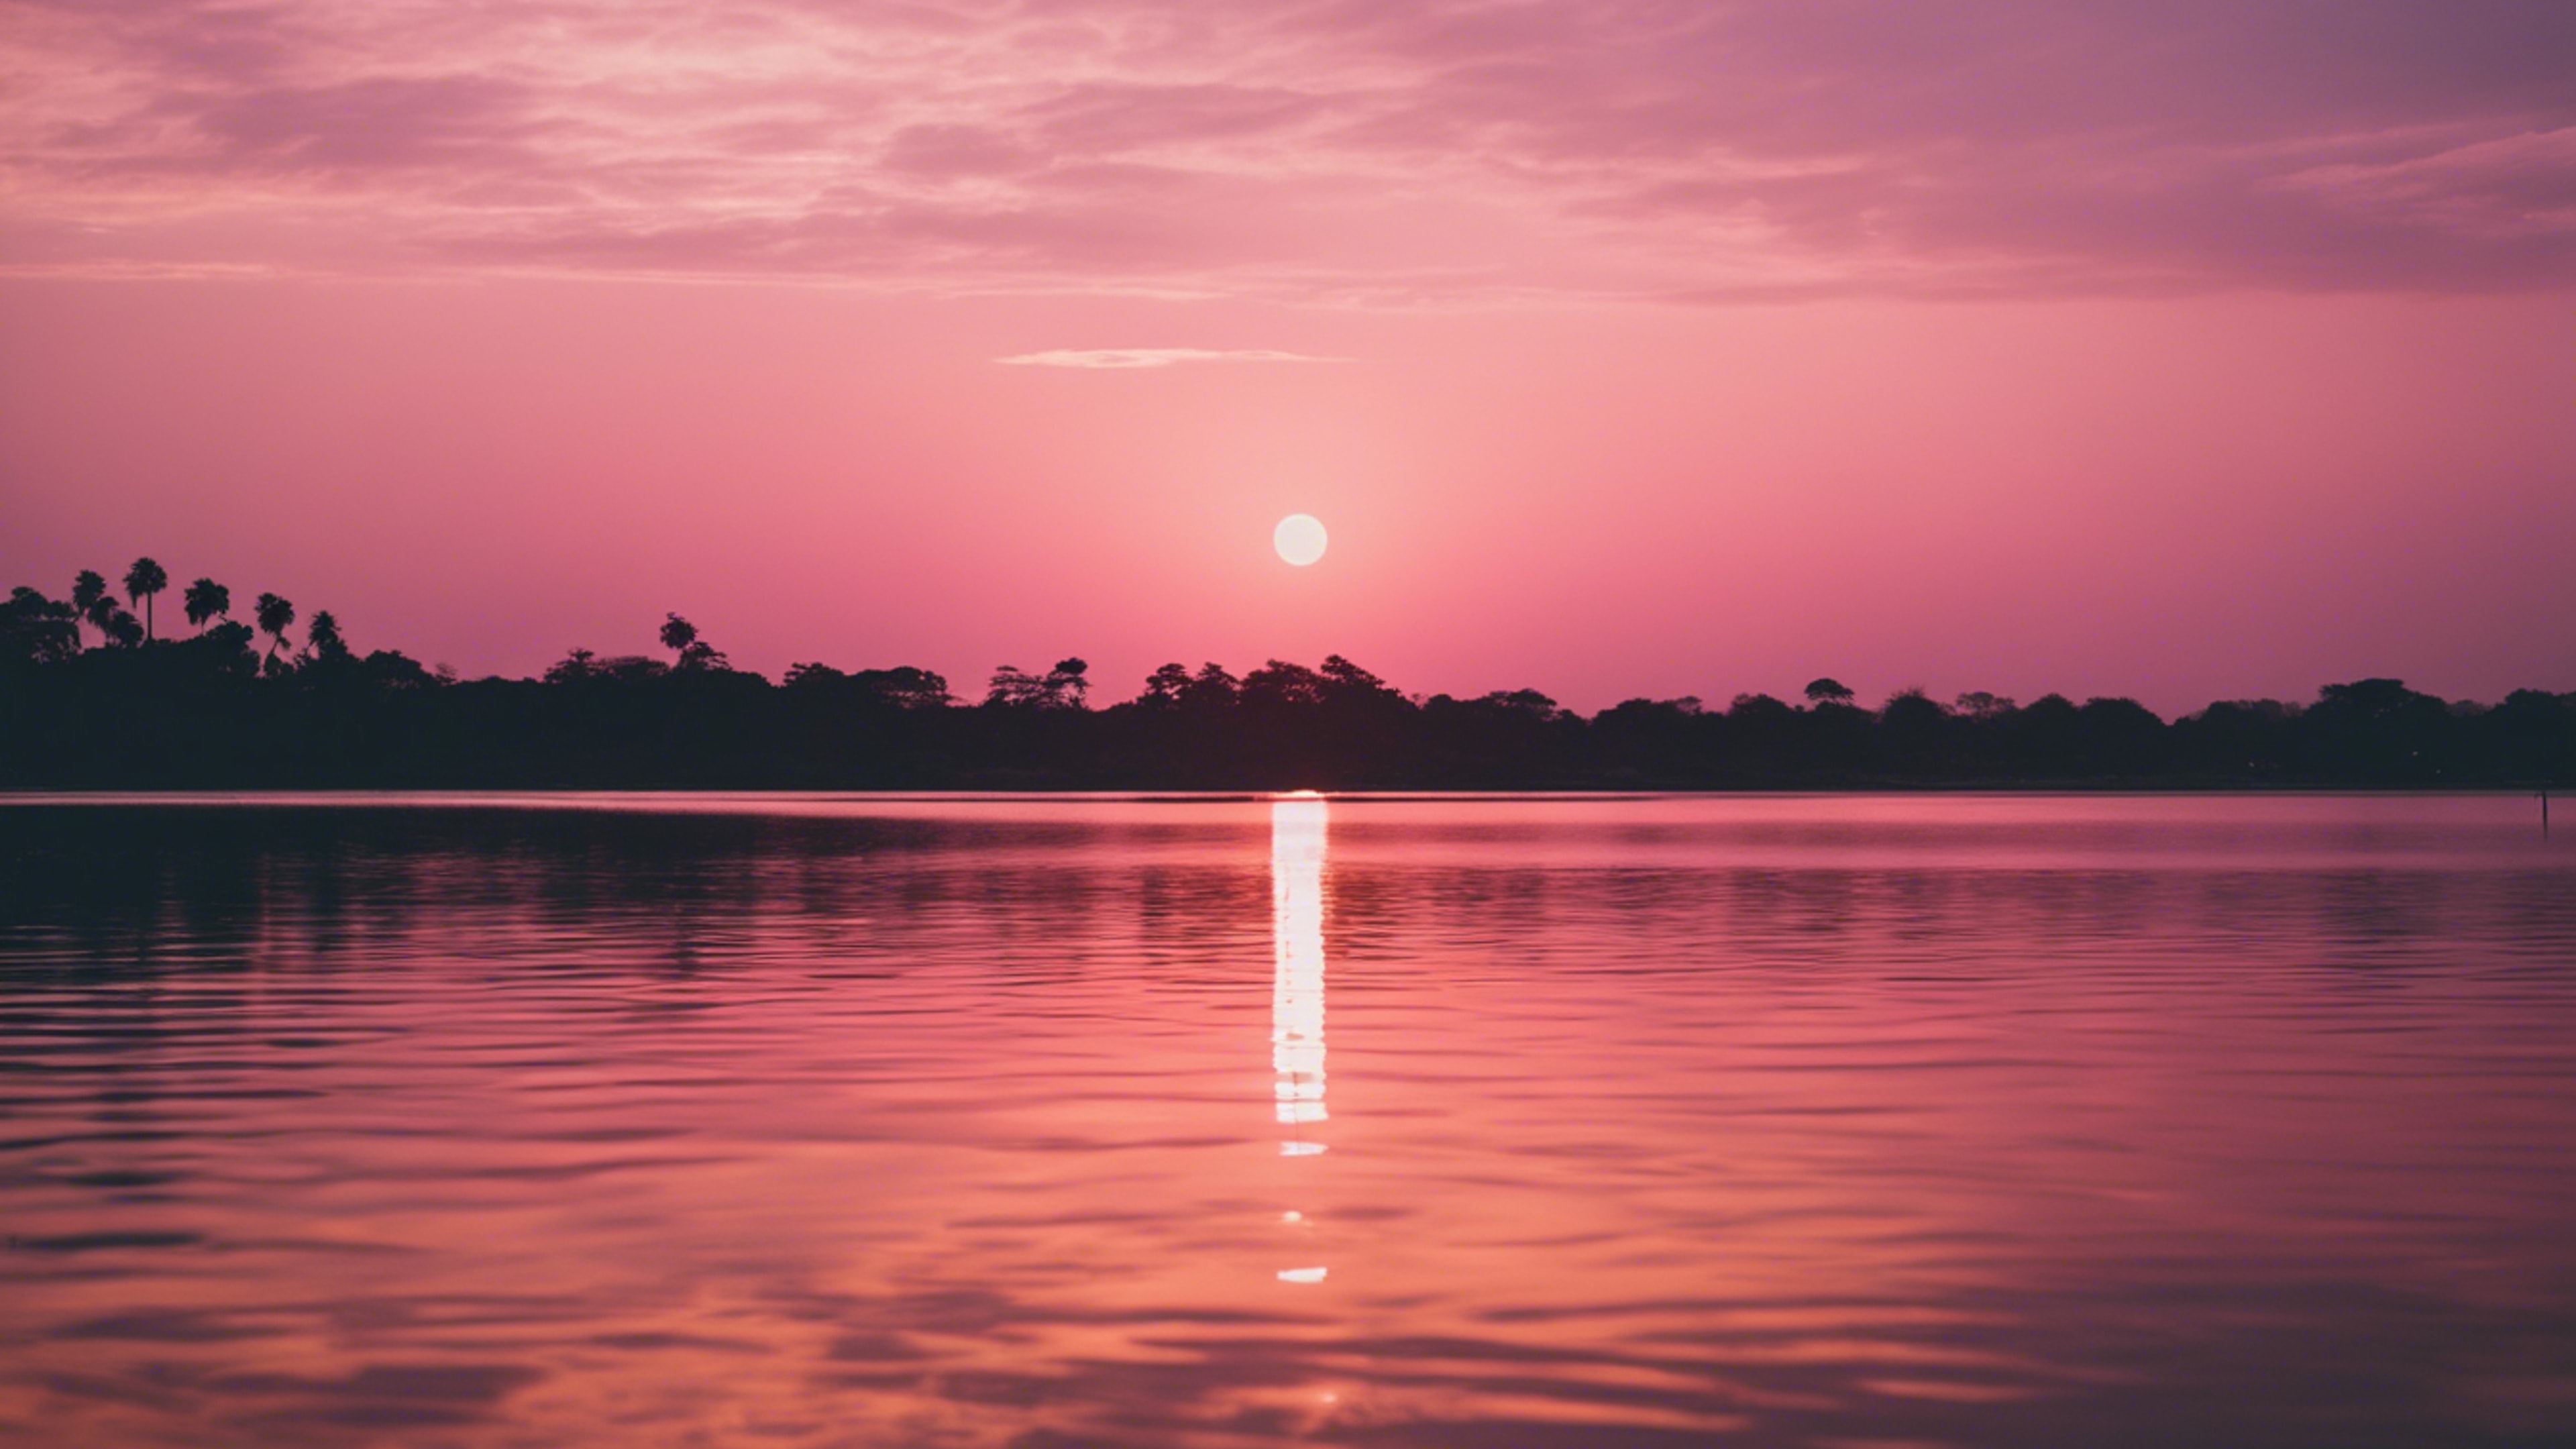 A picturesque pink and gold sunset reflecting on tranquil lagoon waters. ورق الجدران[938883e46b5847a4931b]